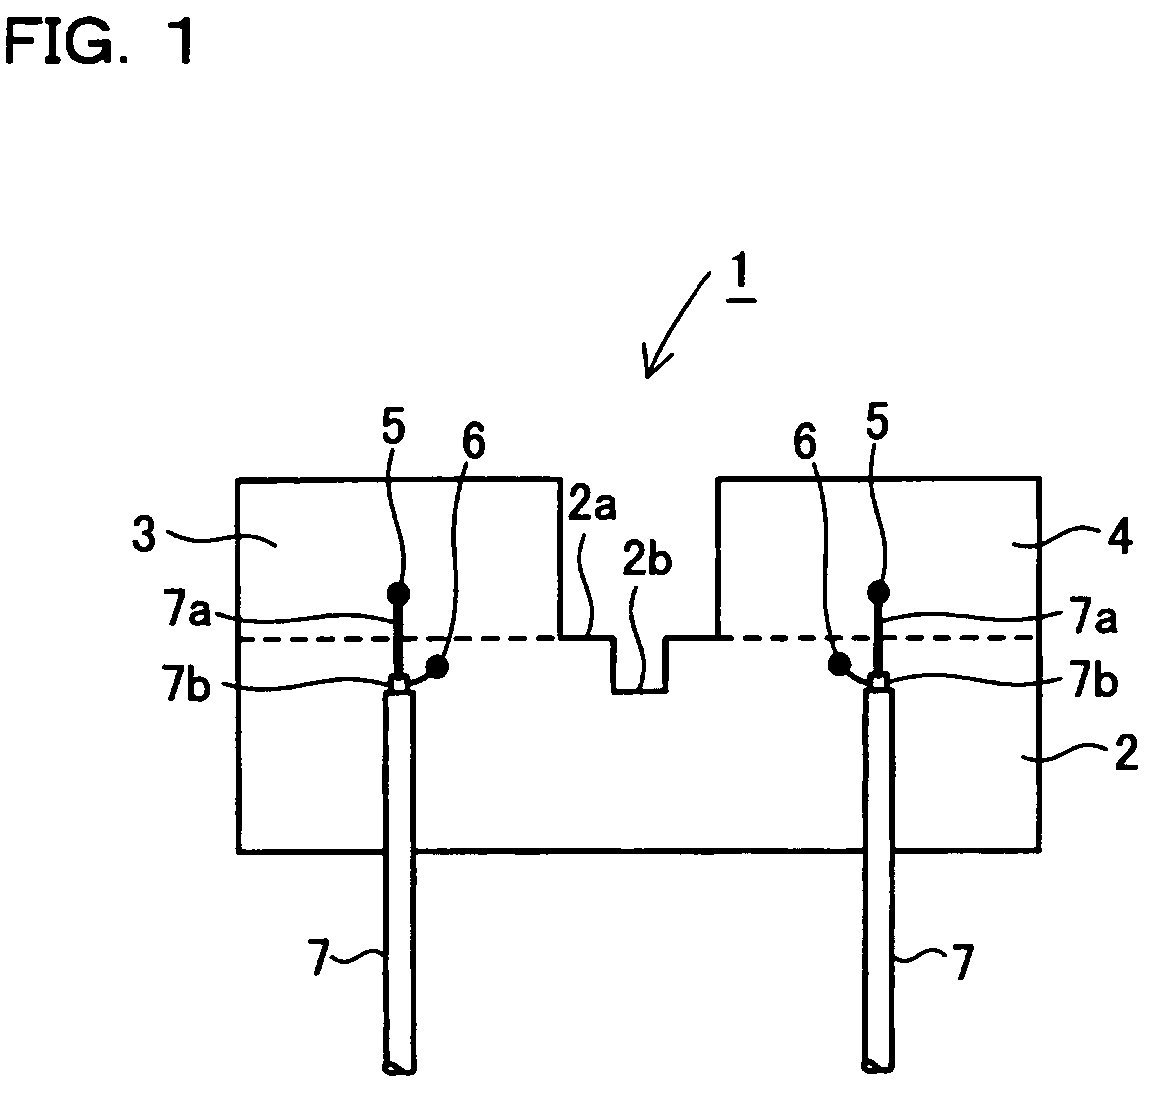 Planar antenna with multiple radiators and notched ground pattern